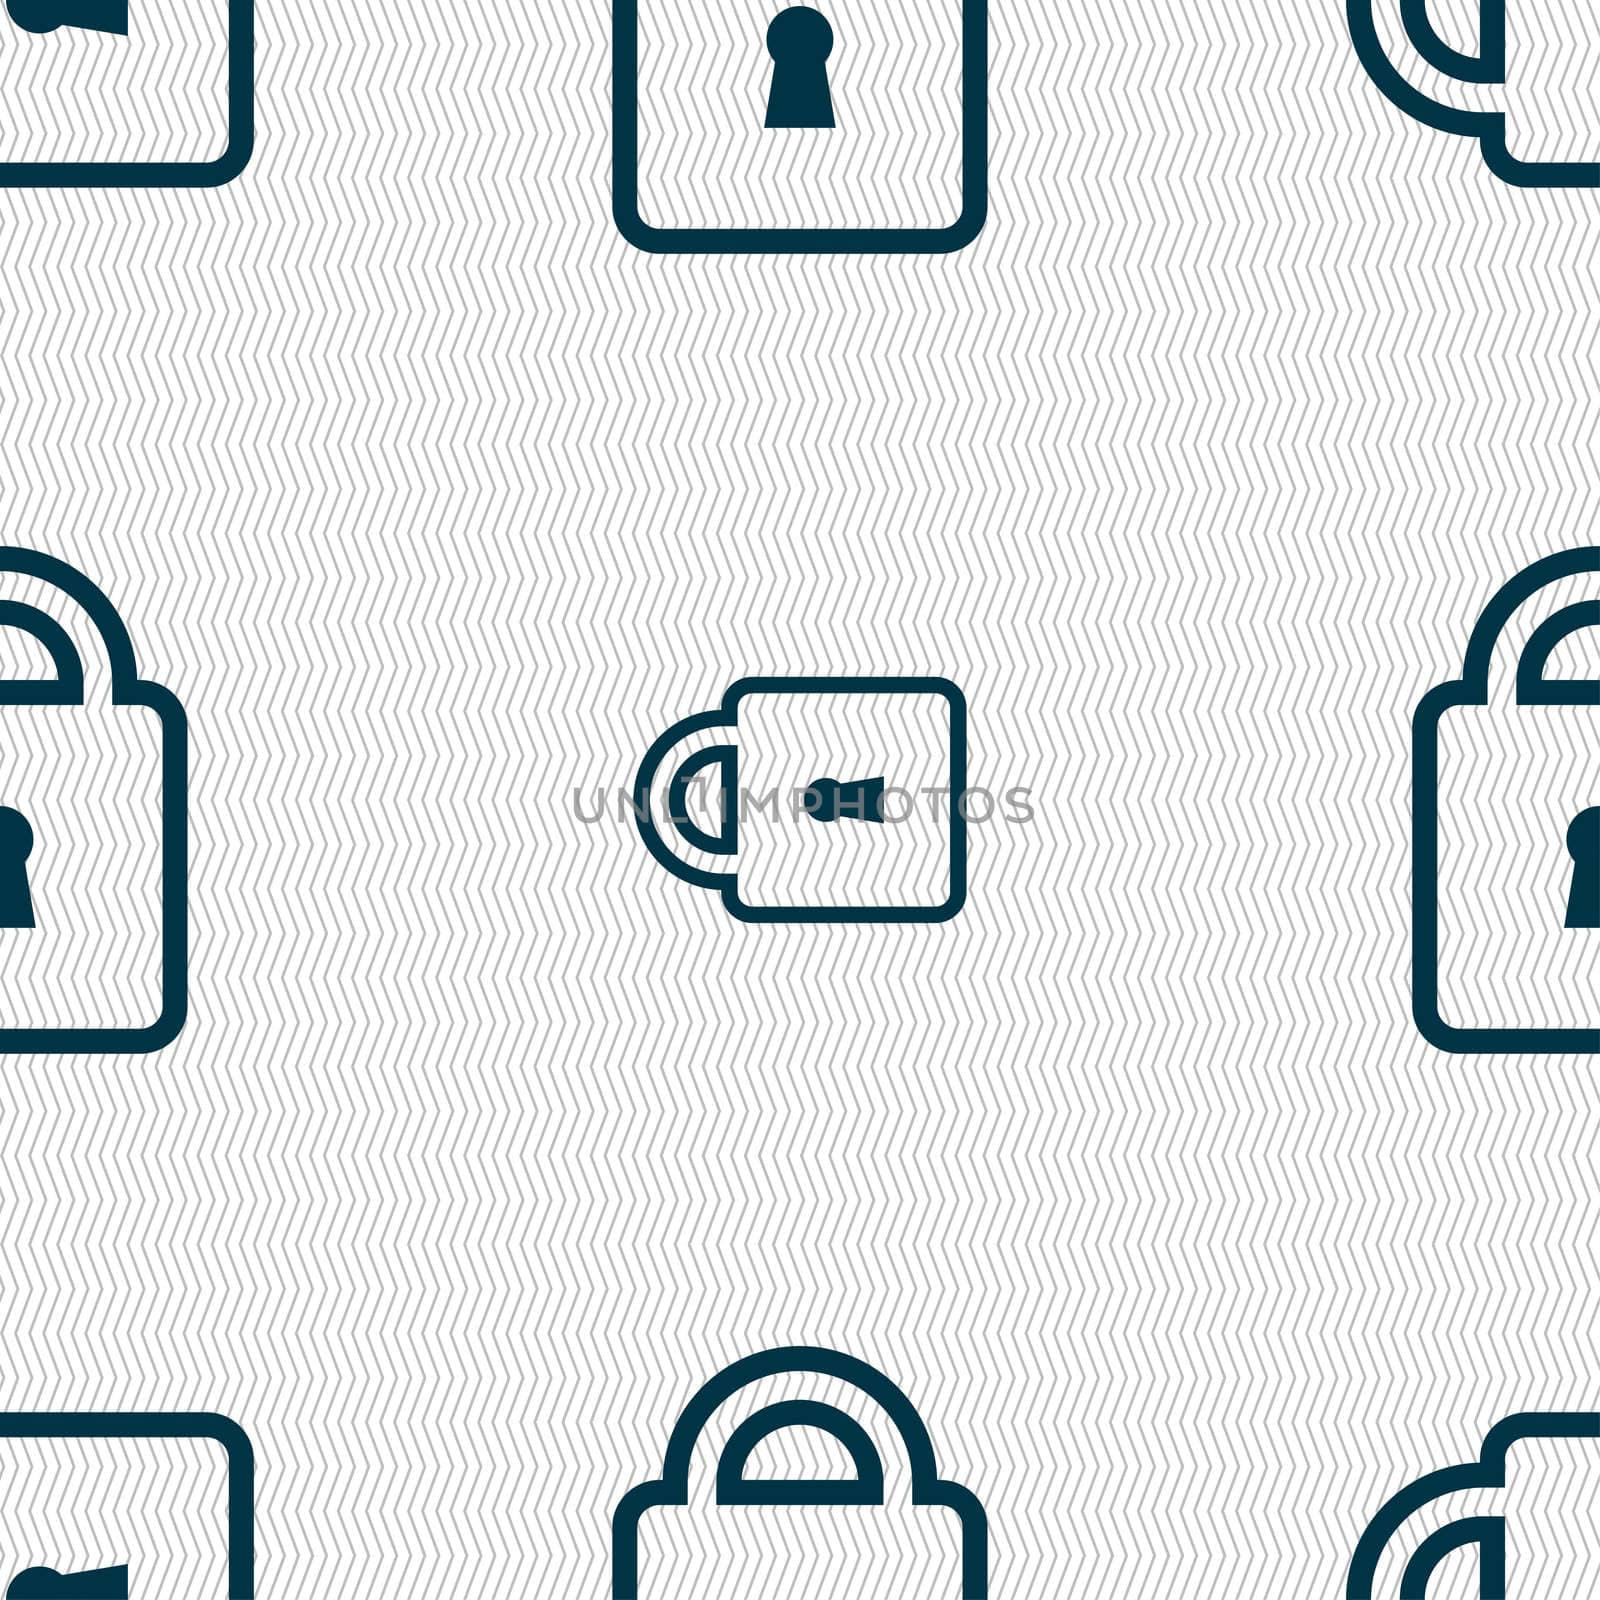 Lock icon sign. Seamless pattern with geometric texture. illustration